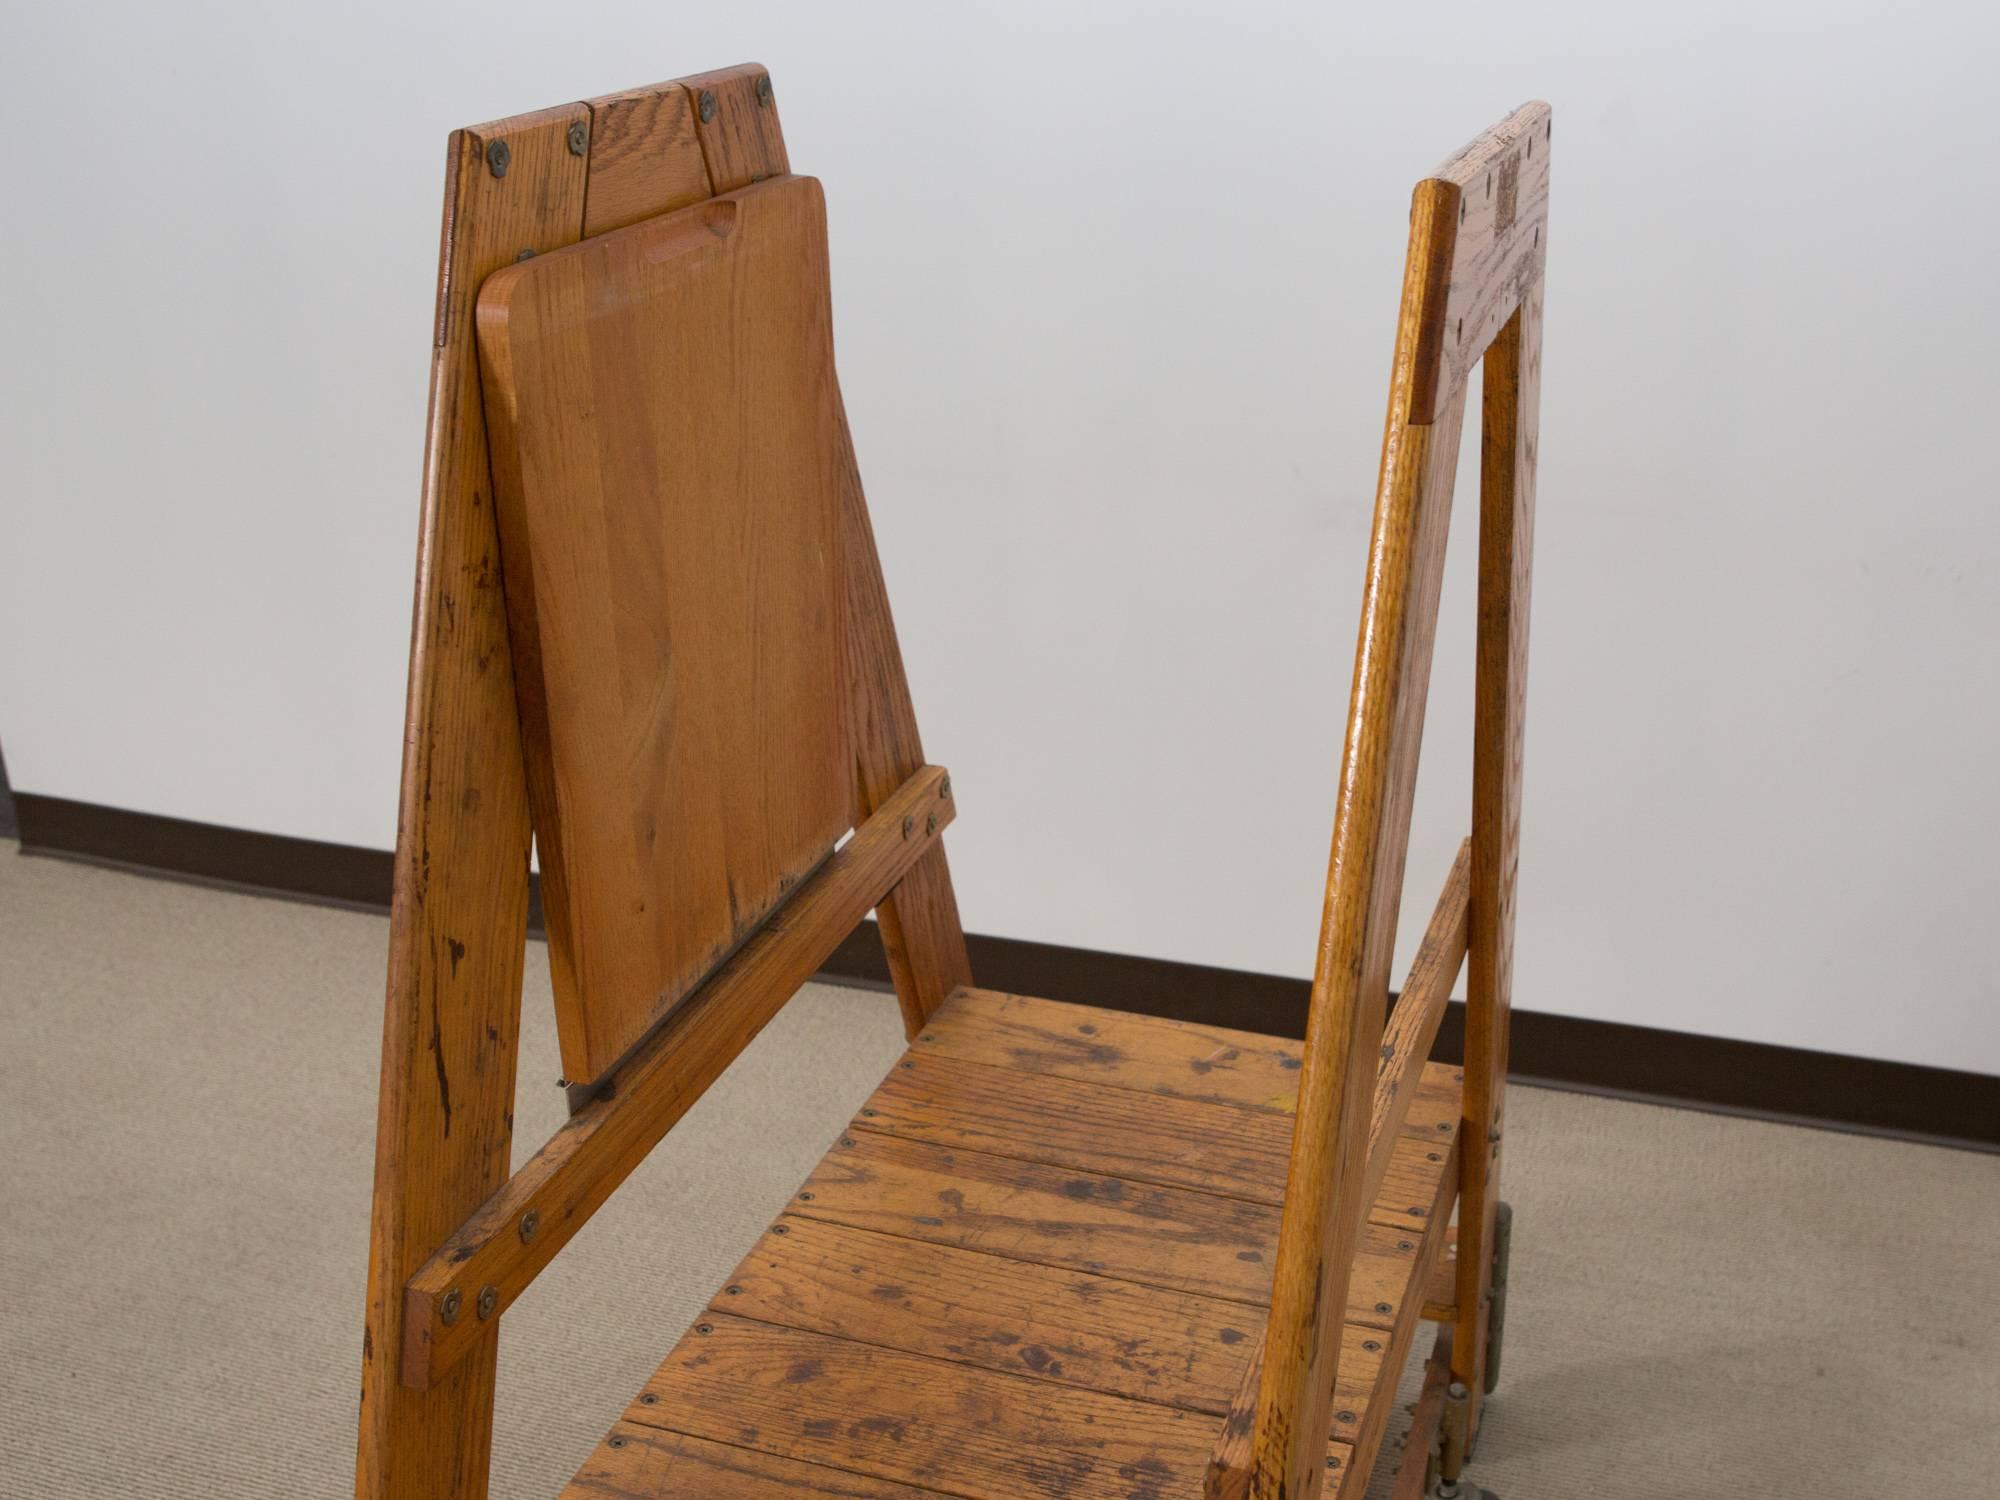 Mid-20th century, American Industrial oak rolling step ladder stamped 